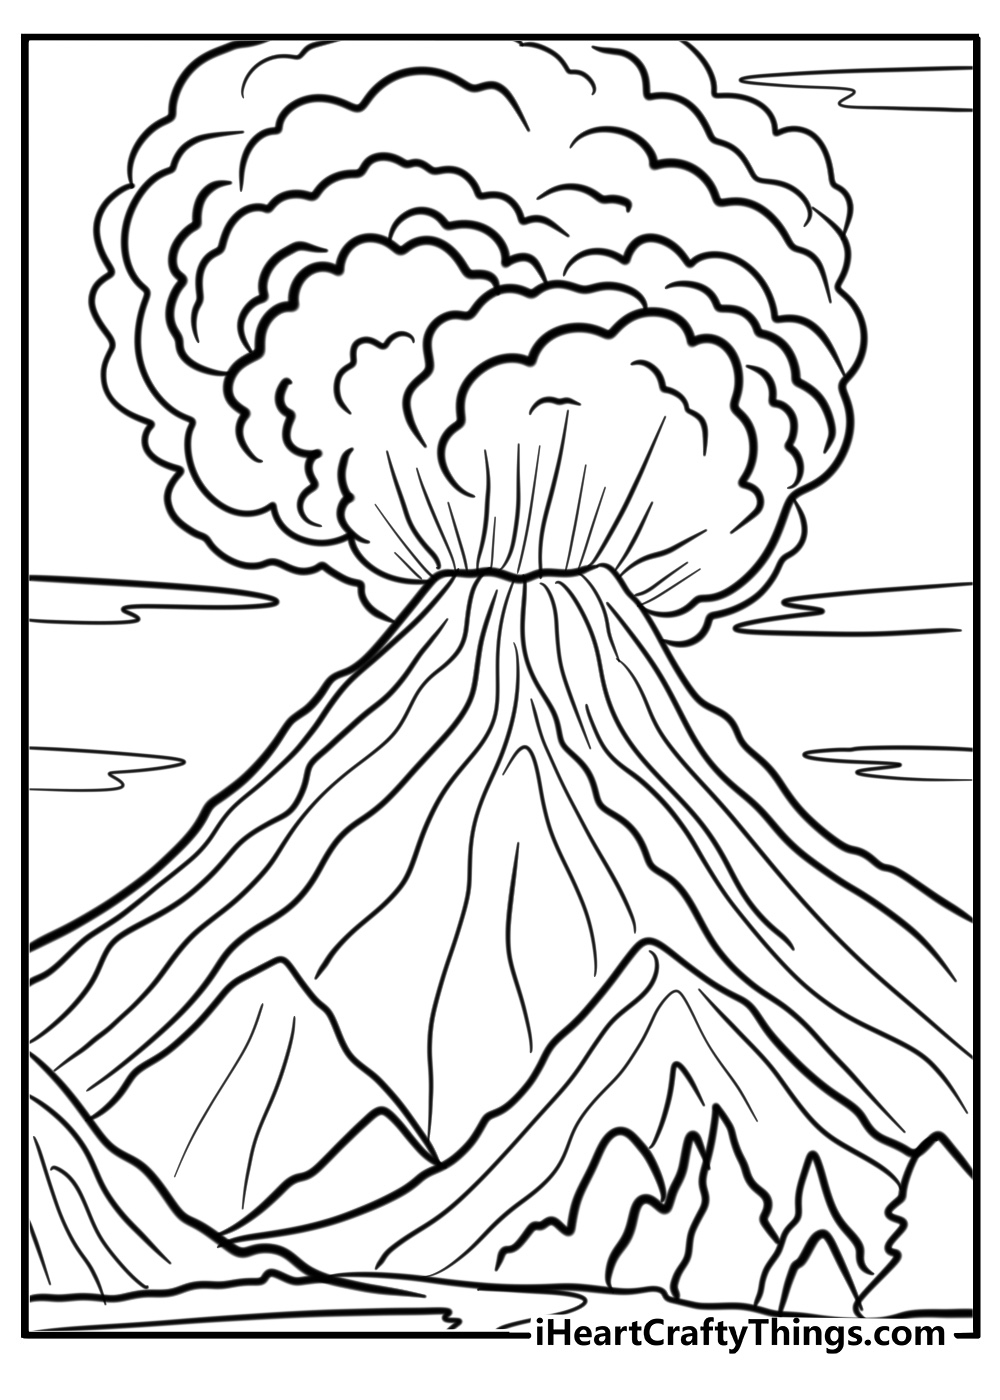 Volcano coloring pages free pdf printable